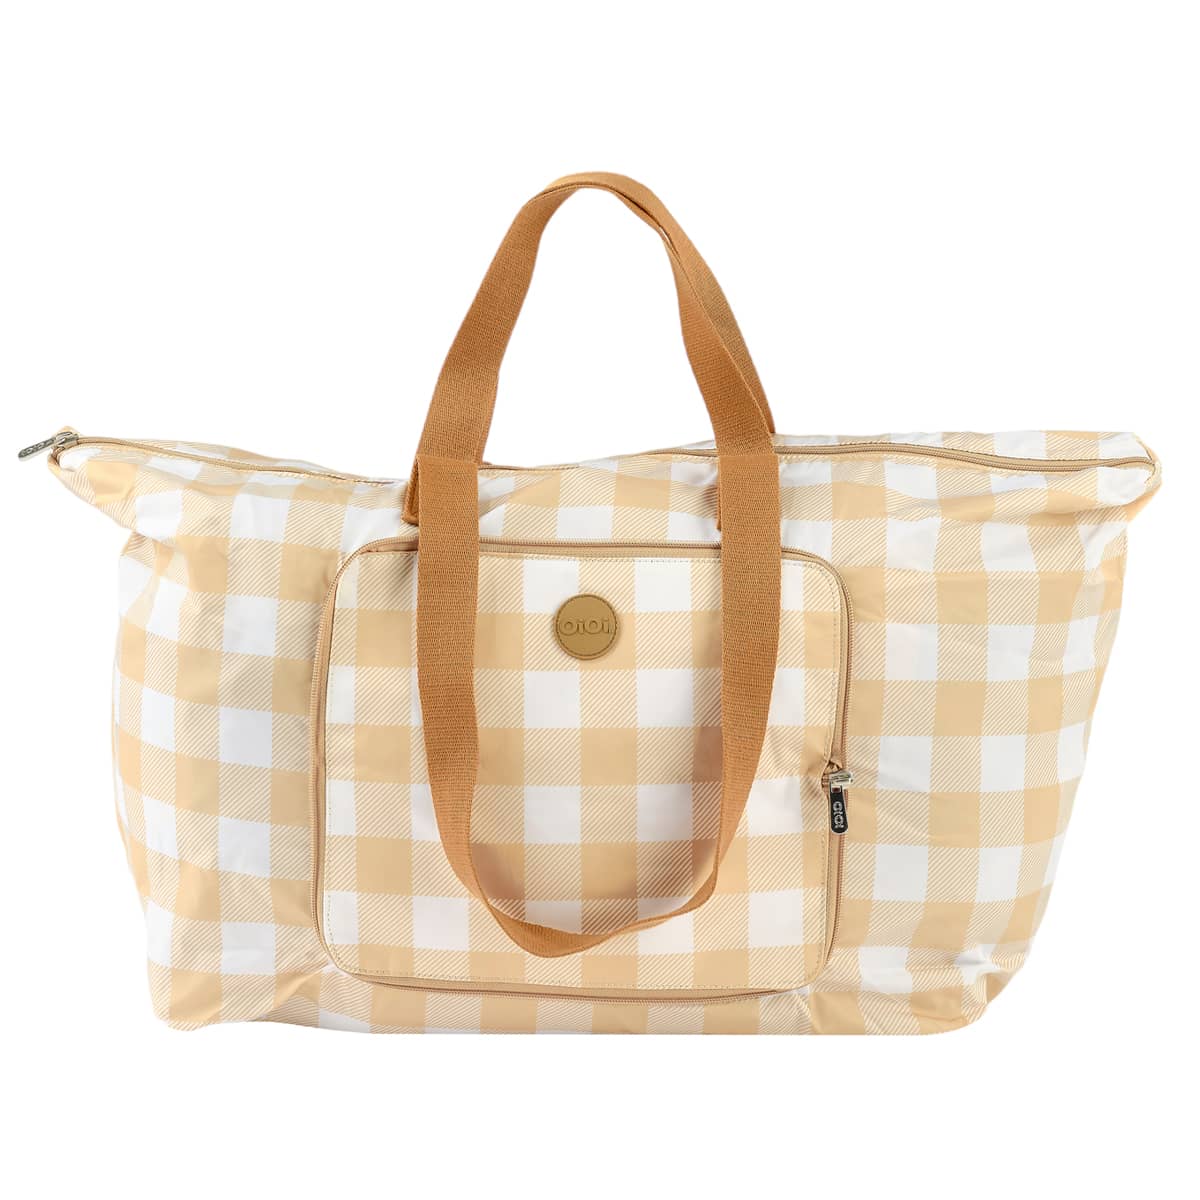 OiOi Fold Up Tote - Gingham Beige